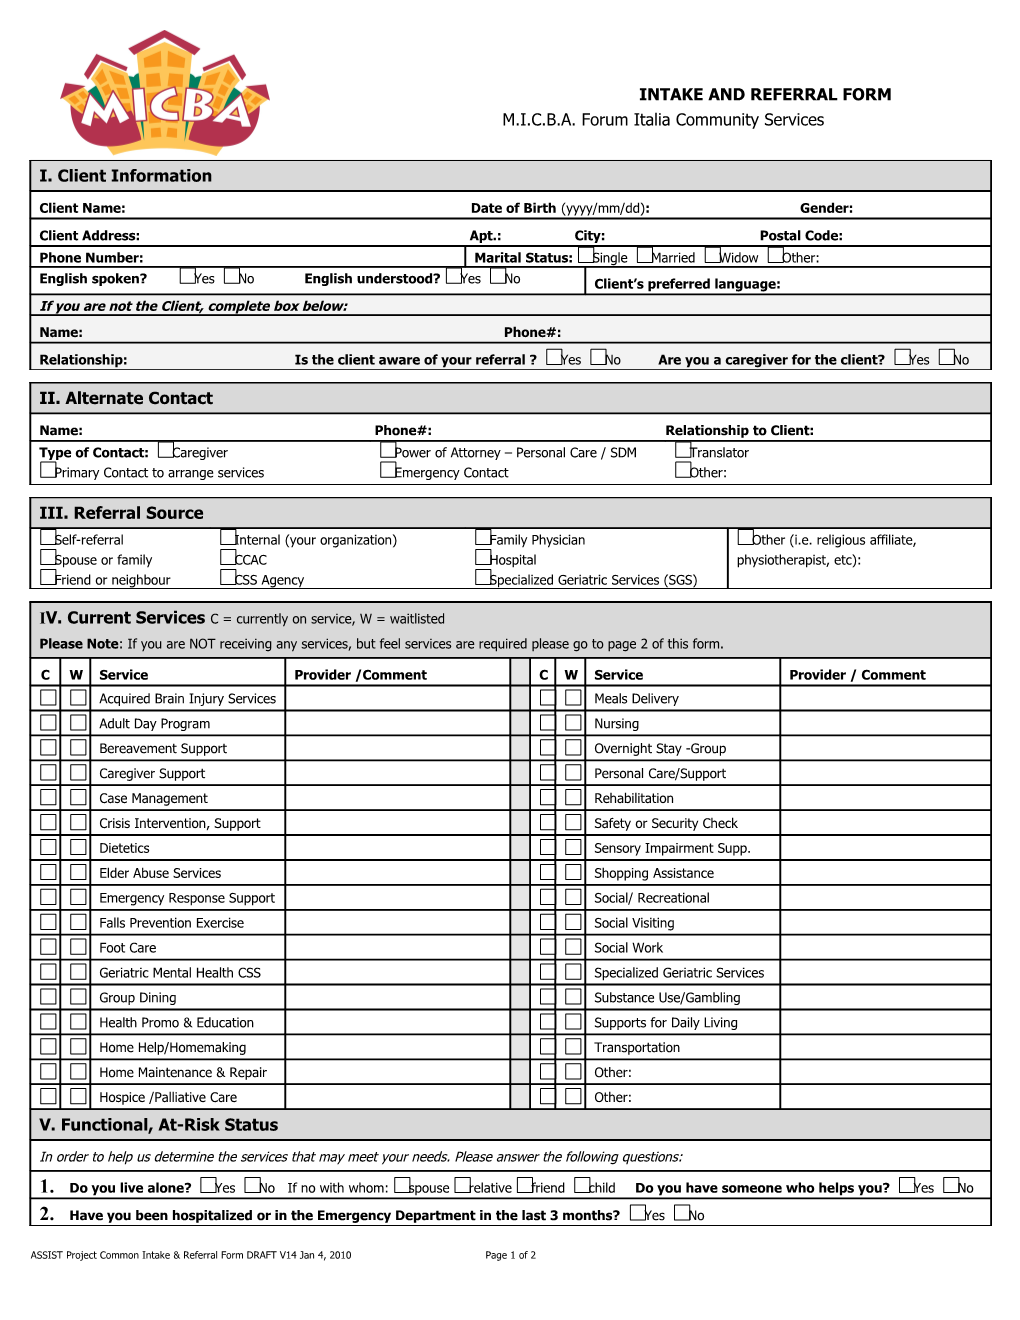 Common Intake and Referral Form